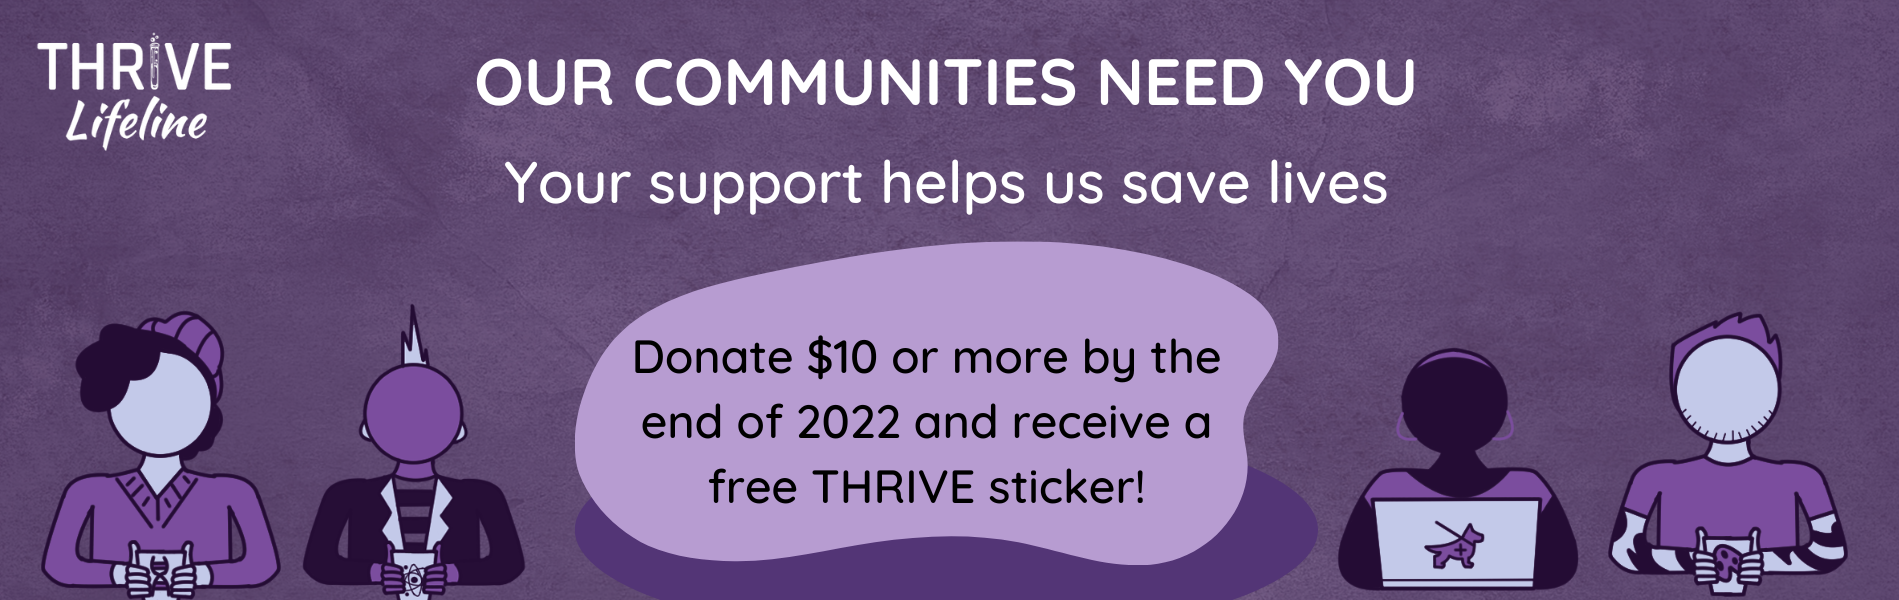 Purple background with white text that says our communities need you. Your support helps us save lives. Donate $10 or more by the end of 2022 and recieve a free THRIVE sticker. Four purple people sit on the bottom of the banner.